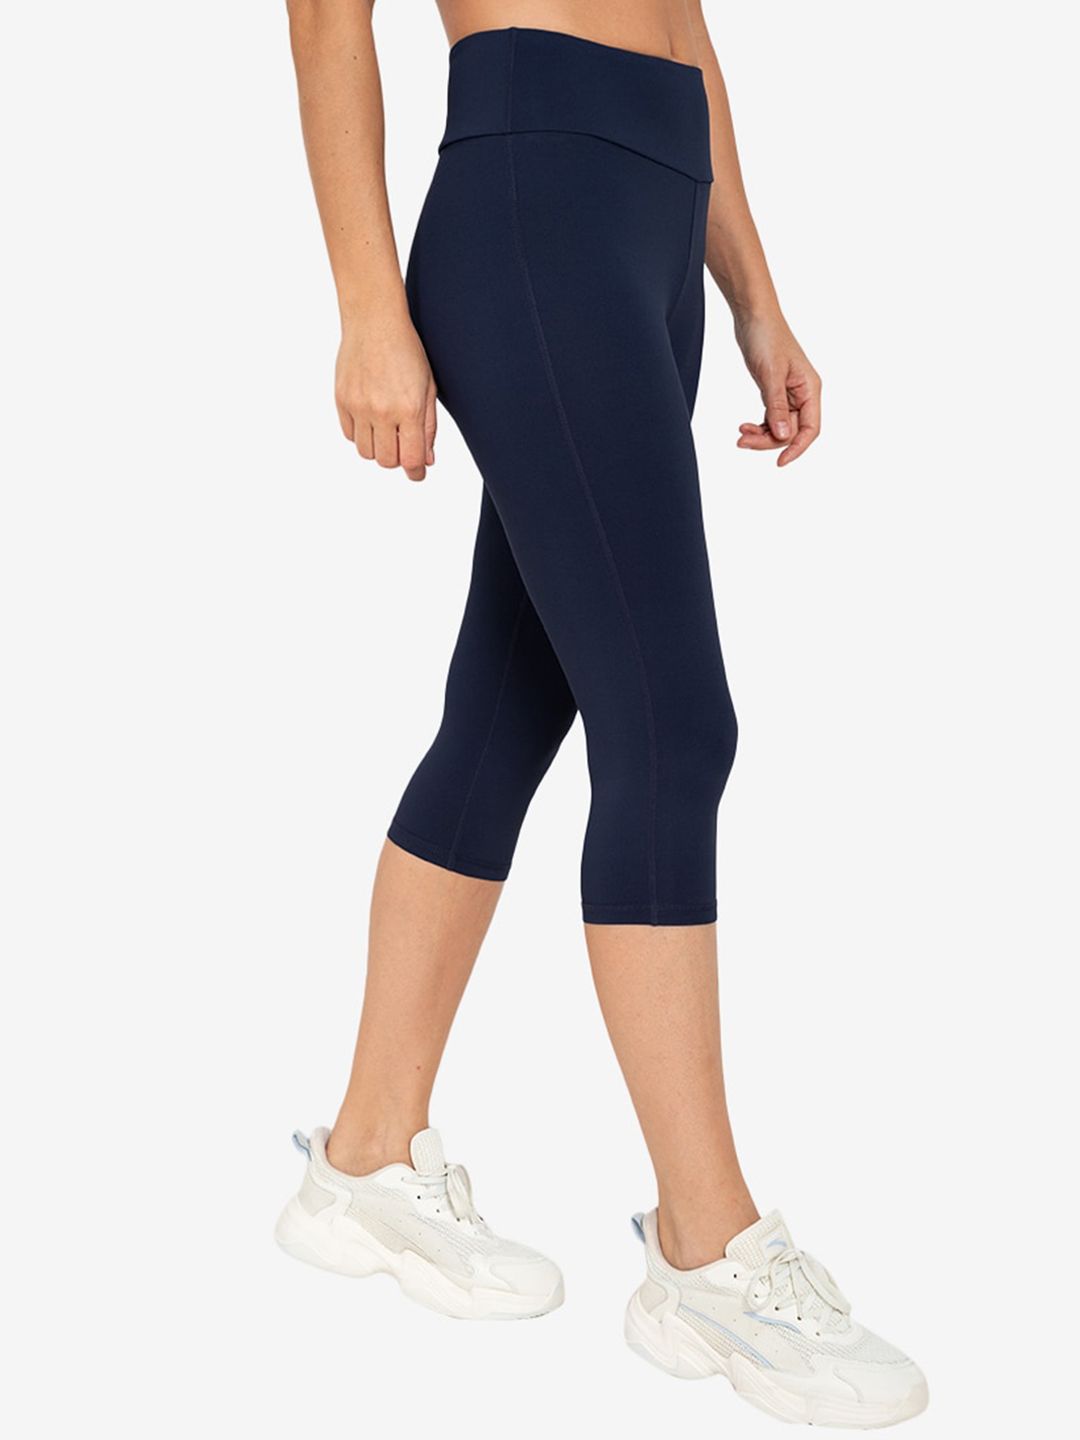 ZALORA ACTIVE Women Navy Blue Solid Tights Price in India